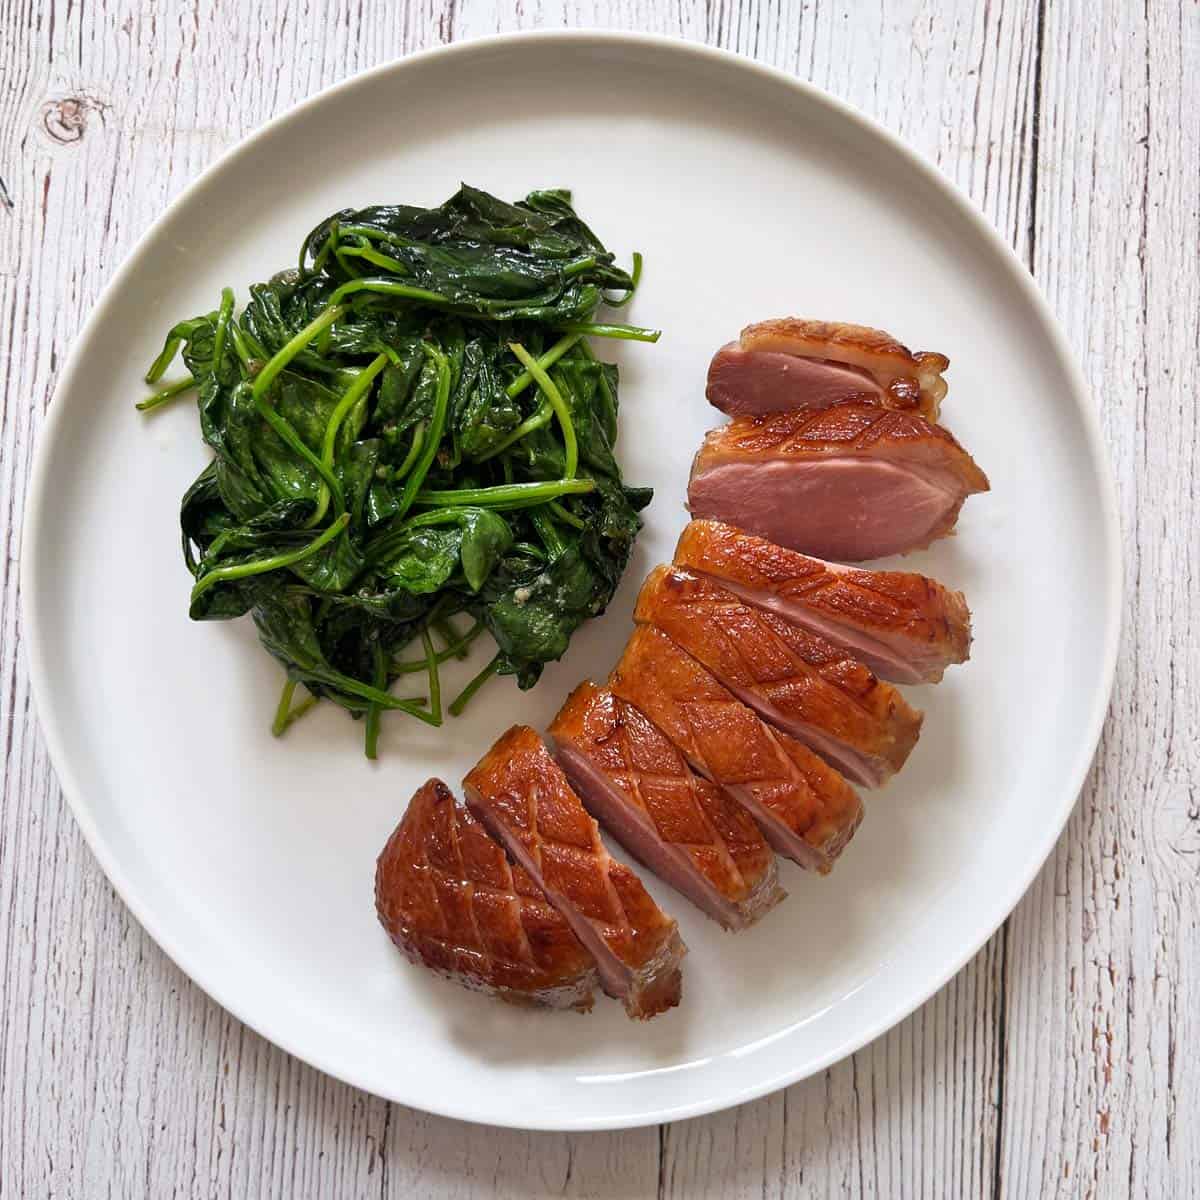 A sliced duck breast is served with sauteed spinach.